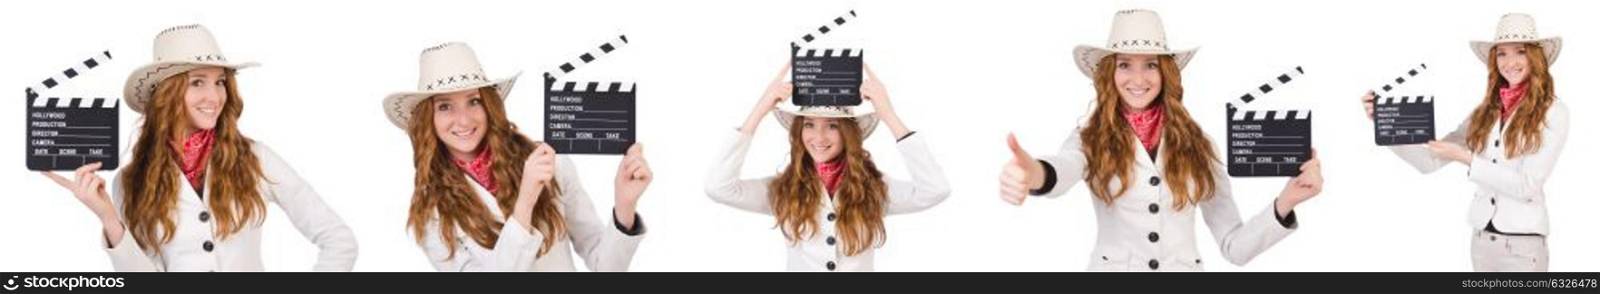 Young cowgirl with movie board isolated on white